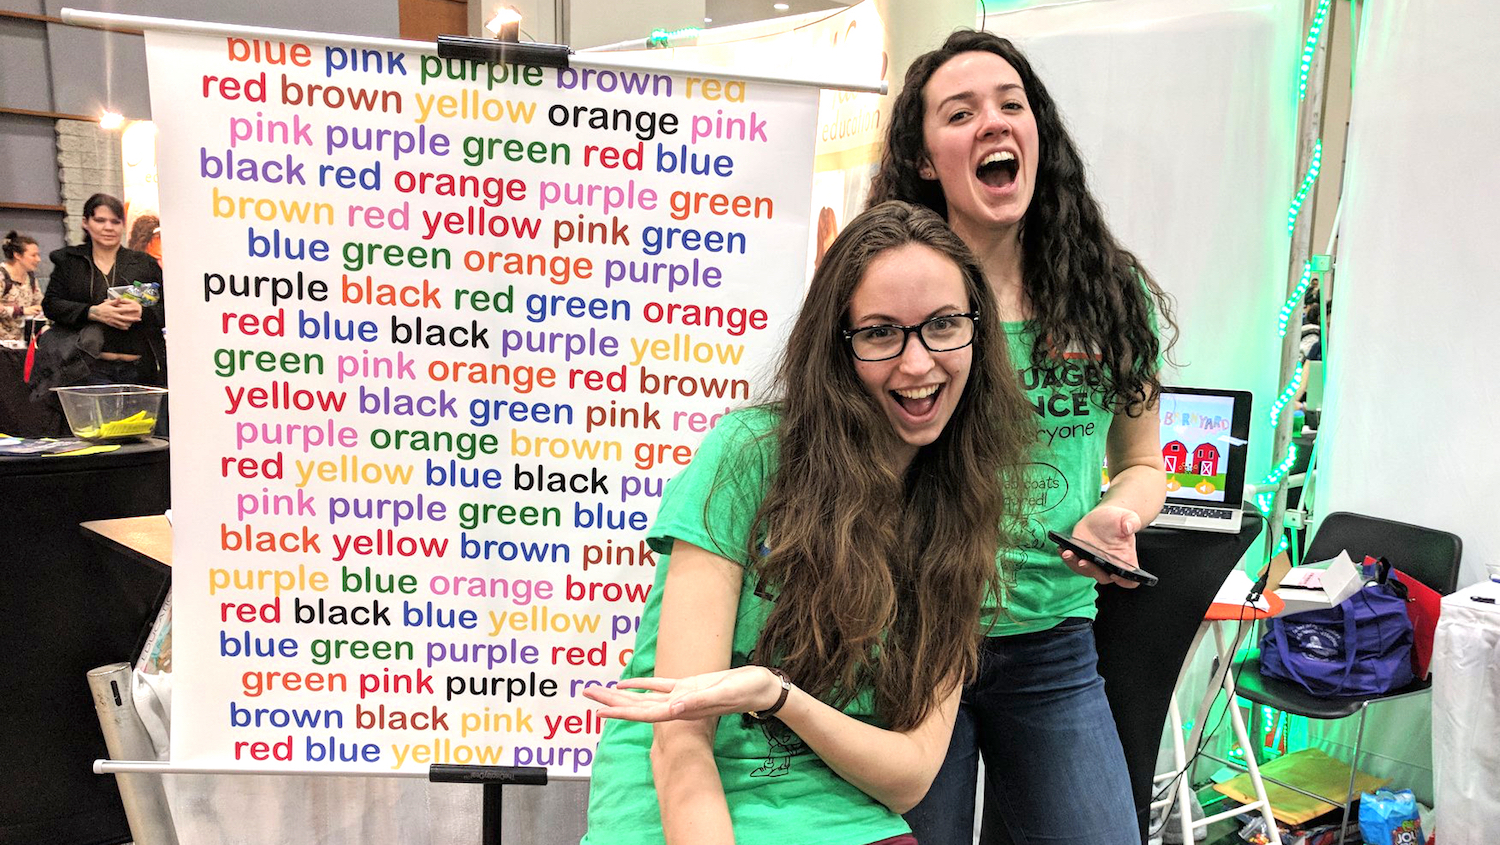 Hanna Muller and Jackie Nelligan having fun while explaining the Stroop Test.